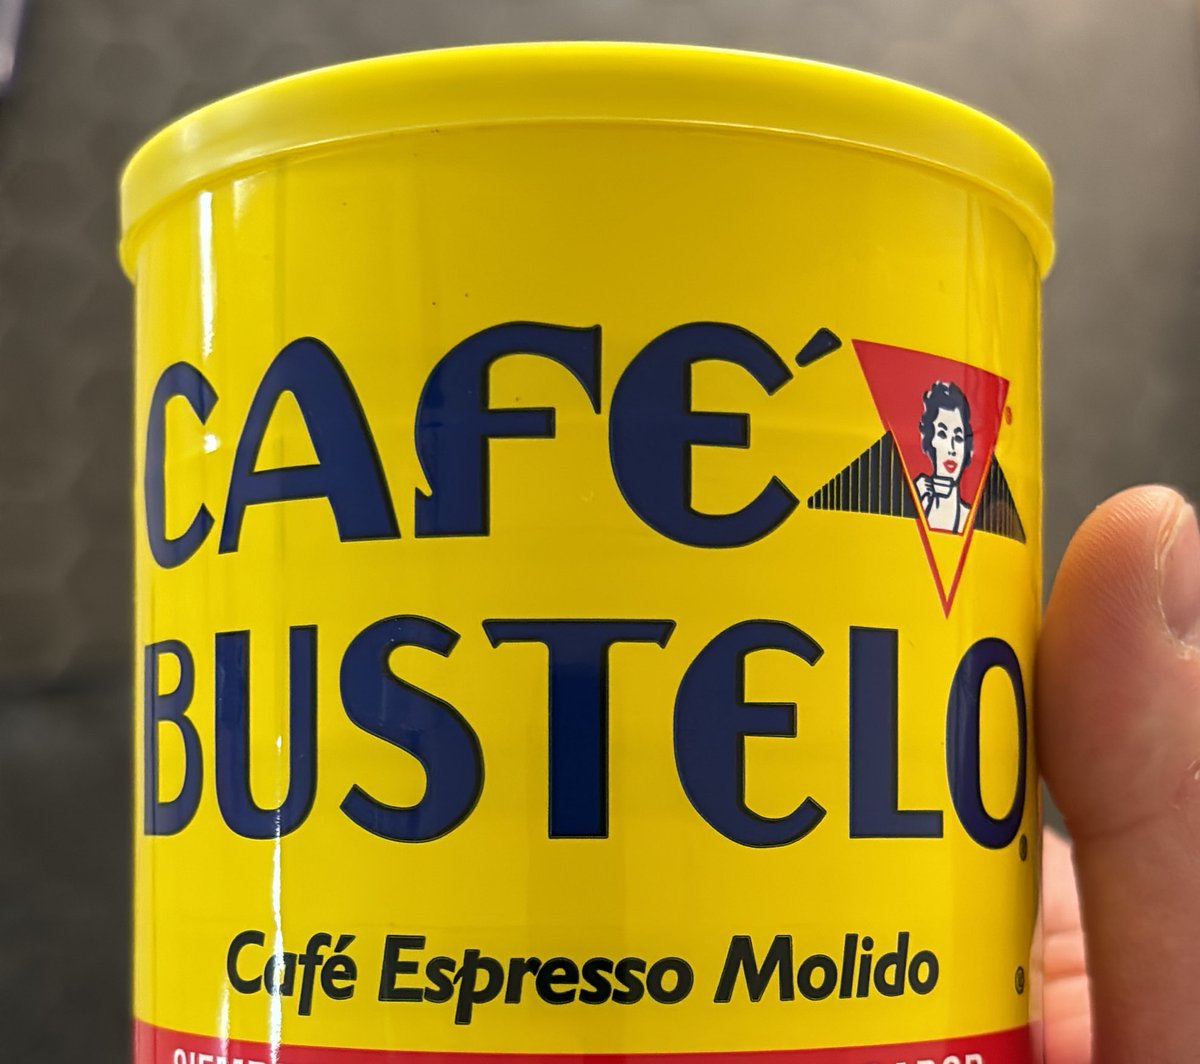 every letter in Café Bustelo showed up ready to play but I must say the intensity that “F” showed up with is unmatched